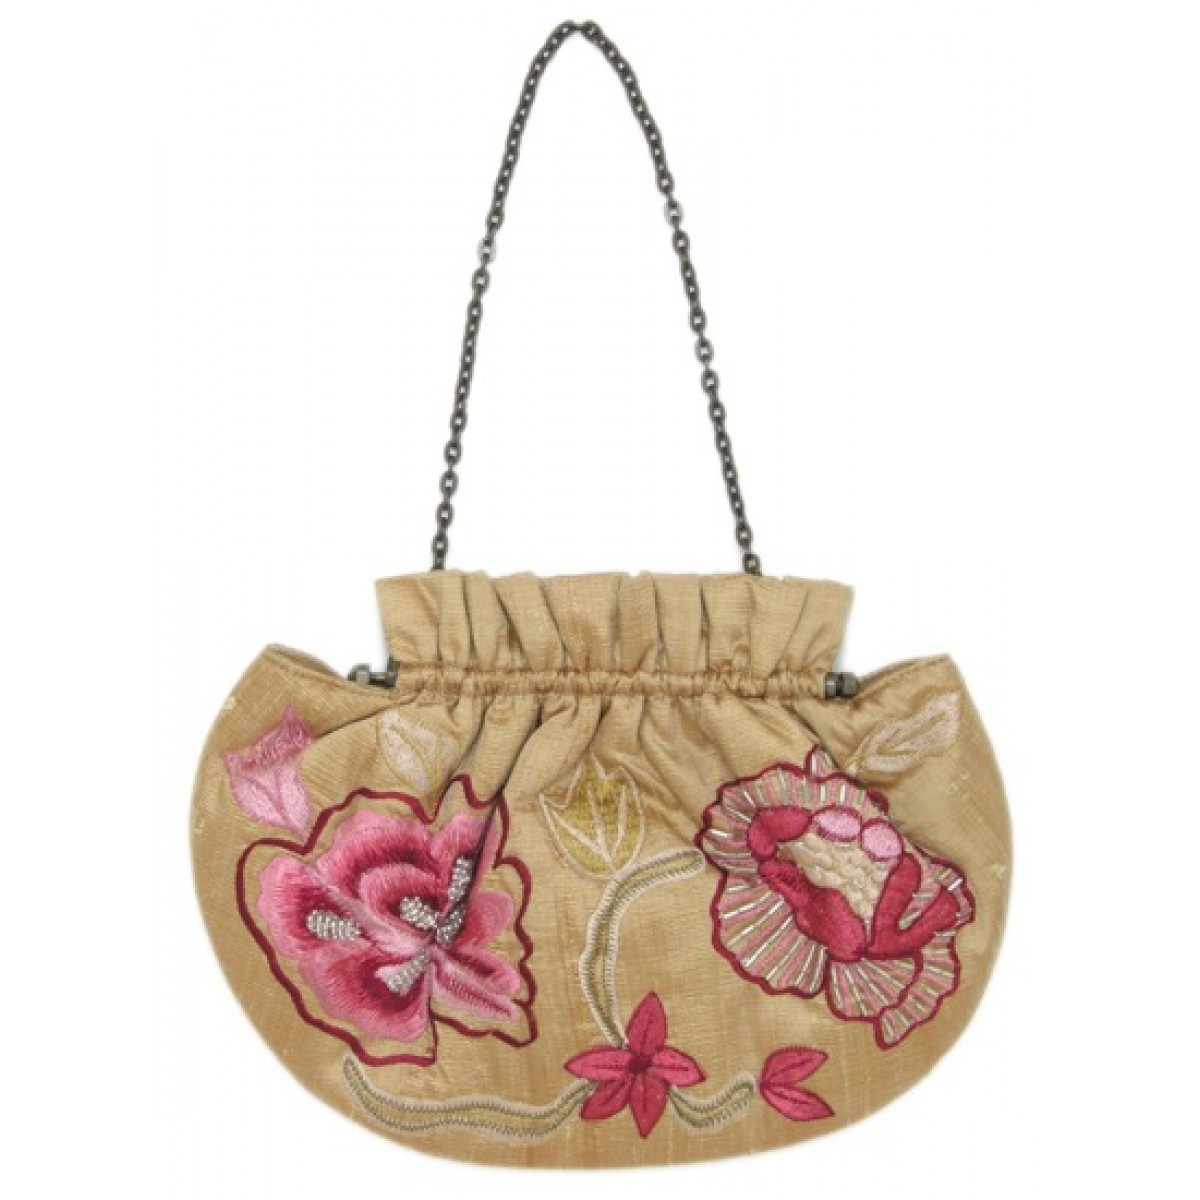 Floral Embroidery Frame Purse